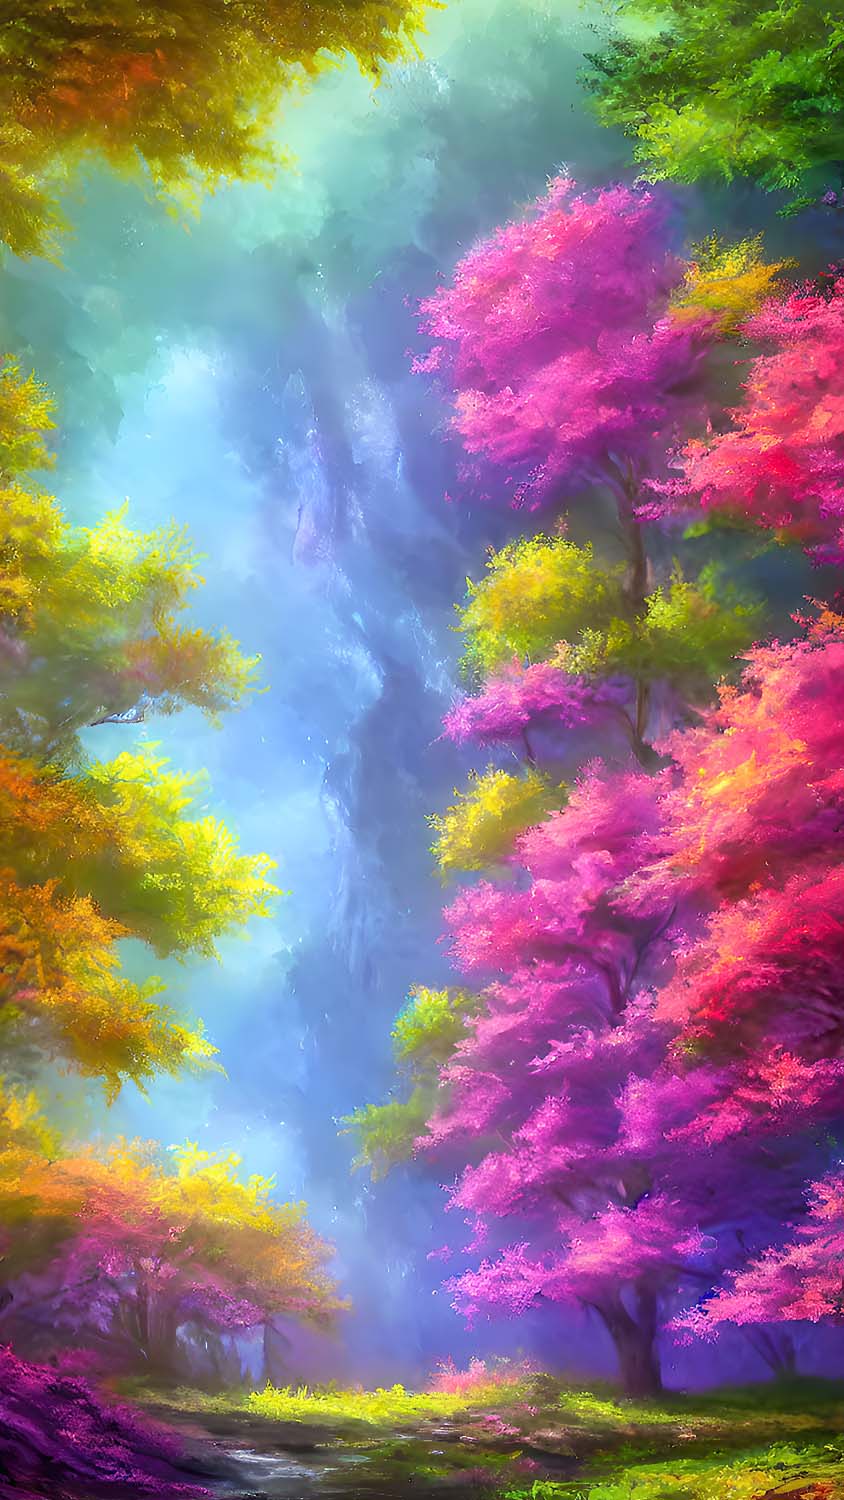 Colorful Trees Painting Scenery IPhone Wallpaper HD - IPhone Wallpapers :  iPhone Wallpapers